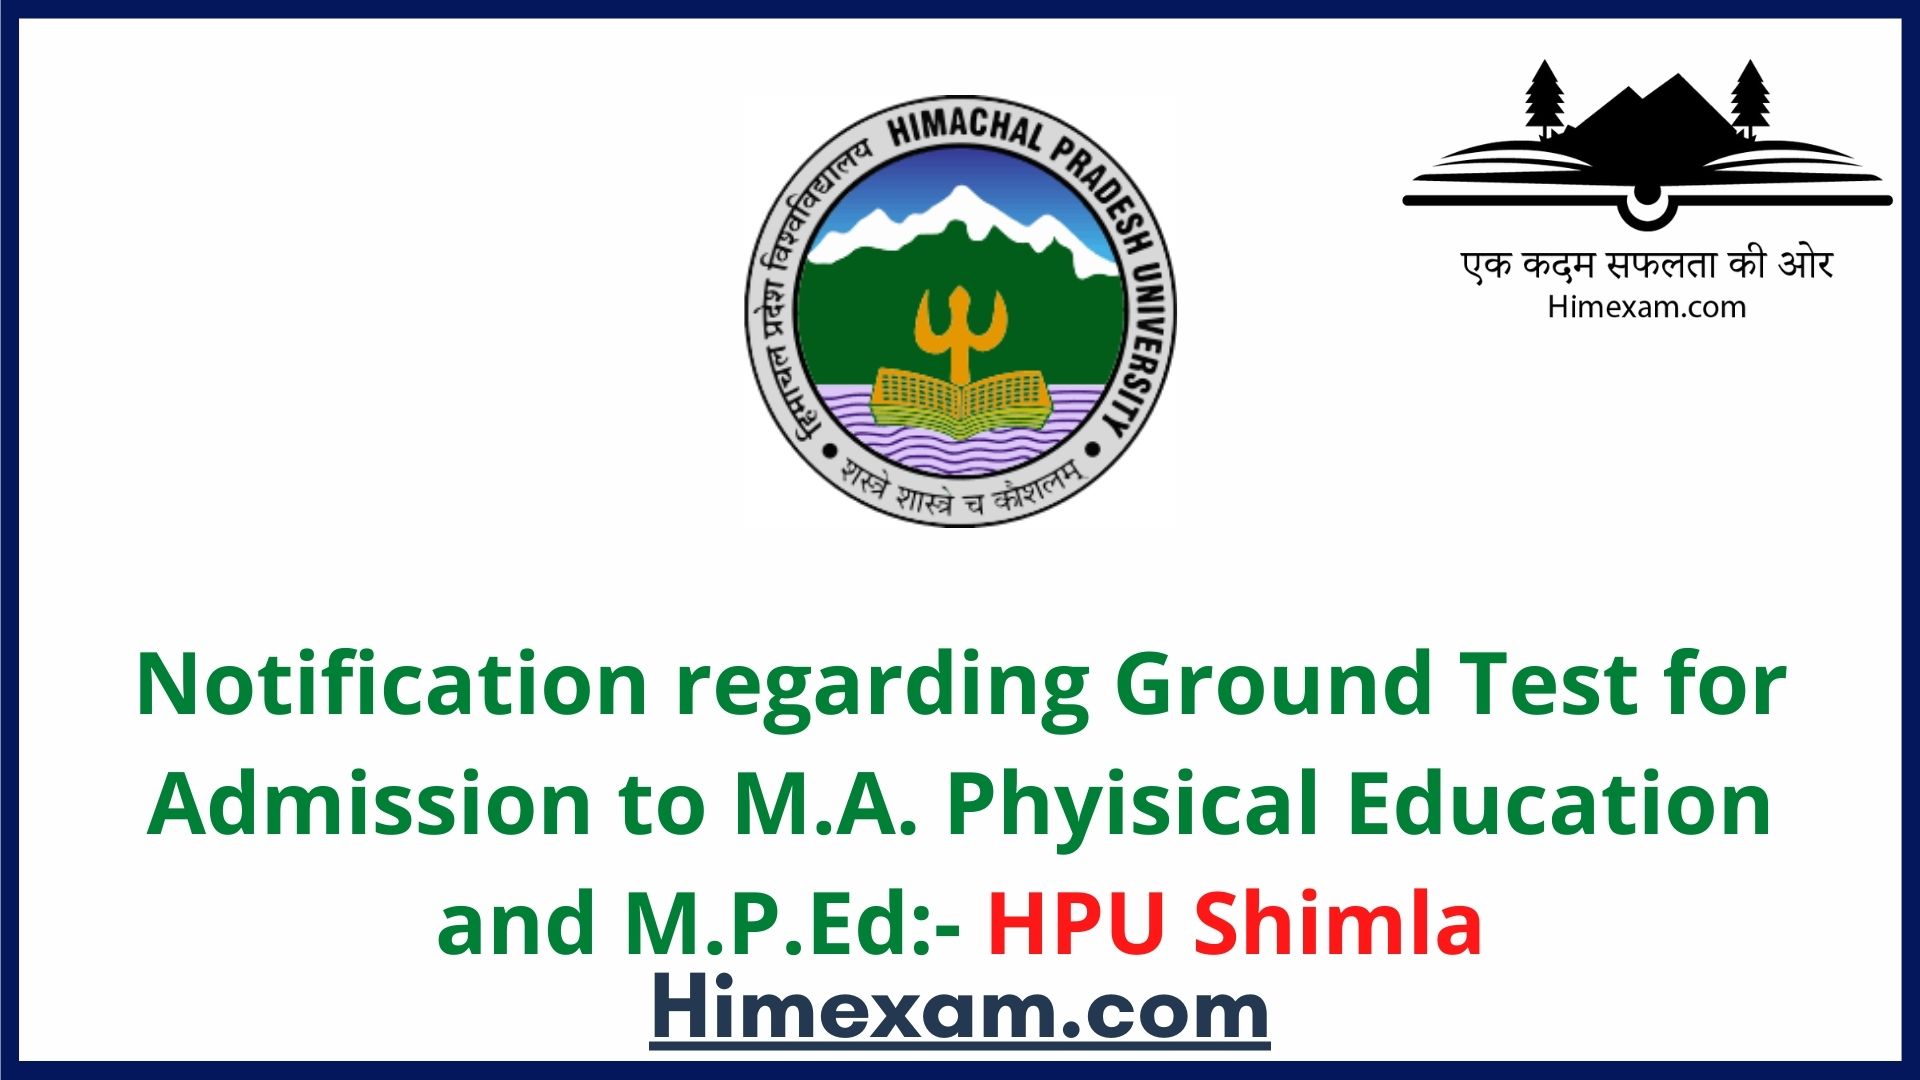 Notification regarding Ground Test for Admission to M.A. Phyisical Education and M.P.Ed:- HPU Shimla